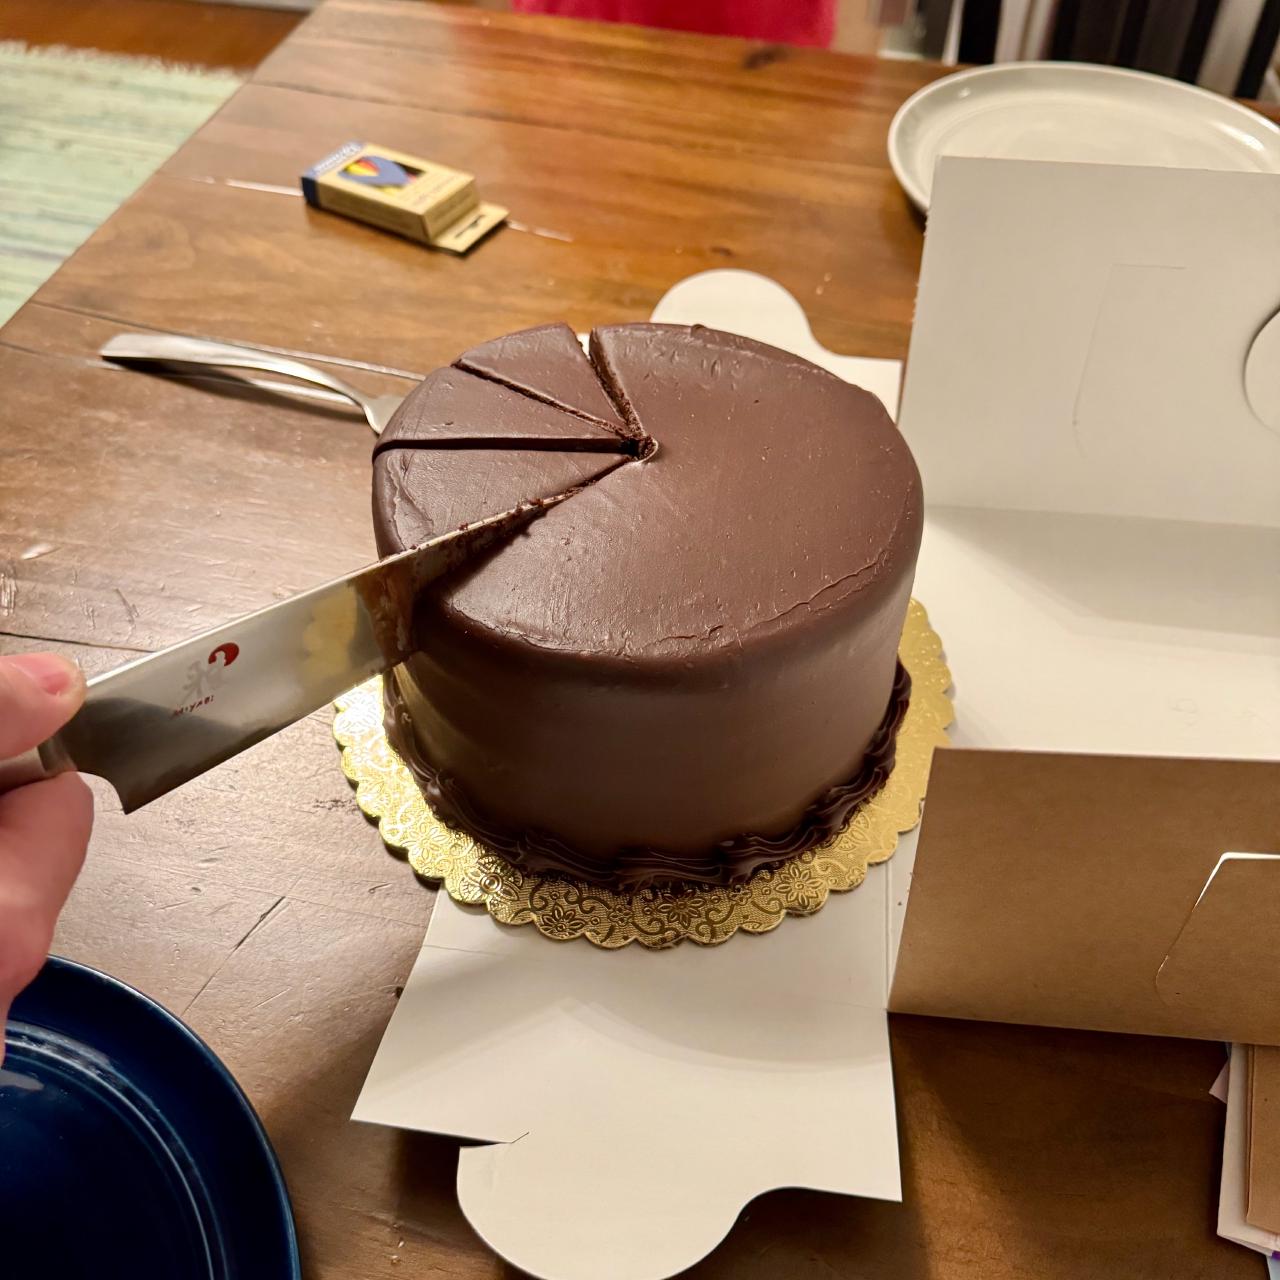  A cylidrical chocolate cake covered in smooth chocolate icing. Small flourishes adorn the bottom. Tess' hand holds a knife, part way through making a cut. Several more cuts mark out three pieces of cake ready to be served. 